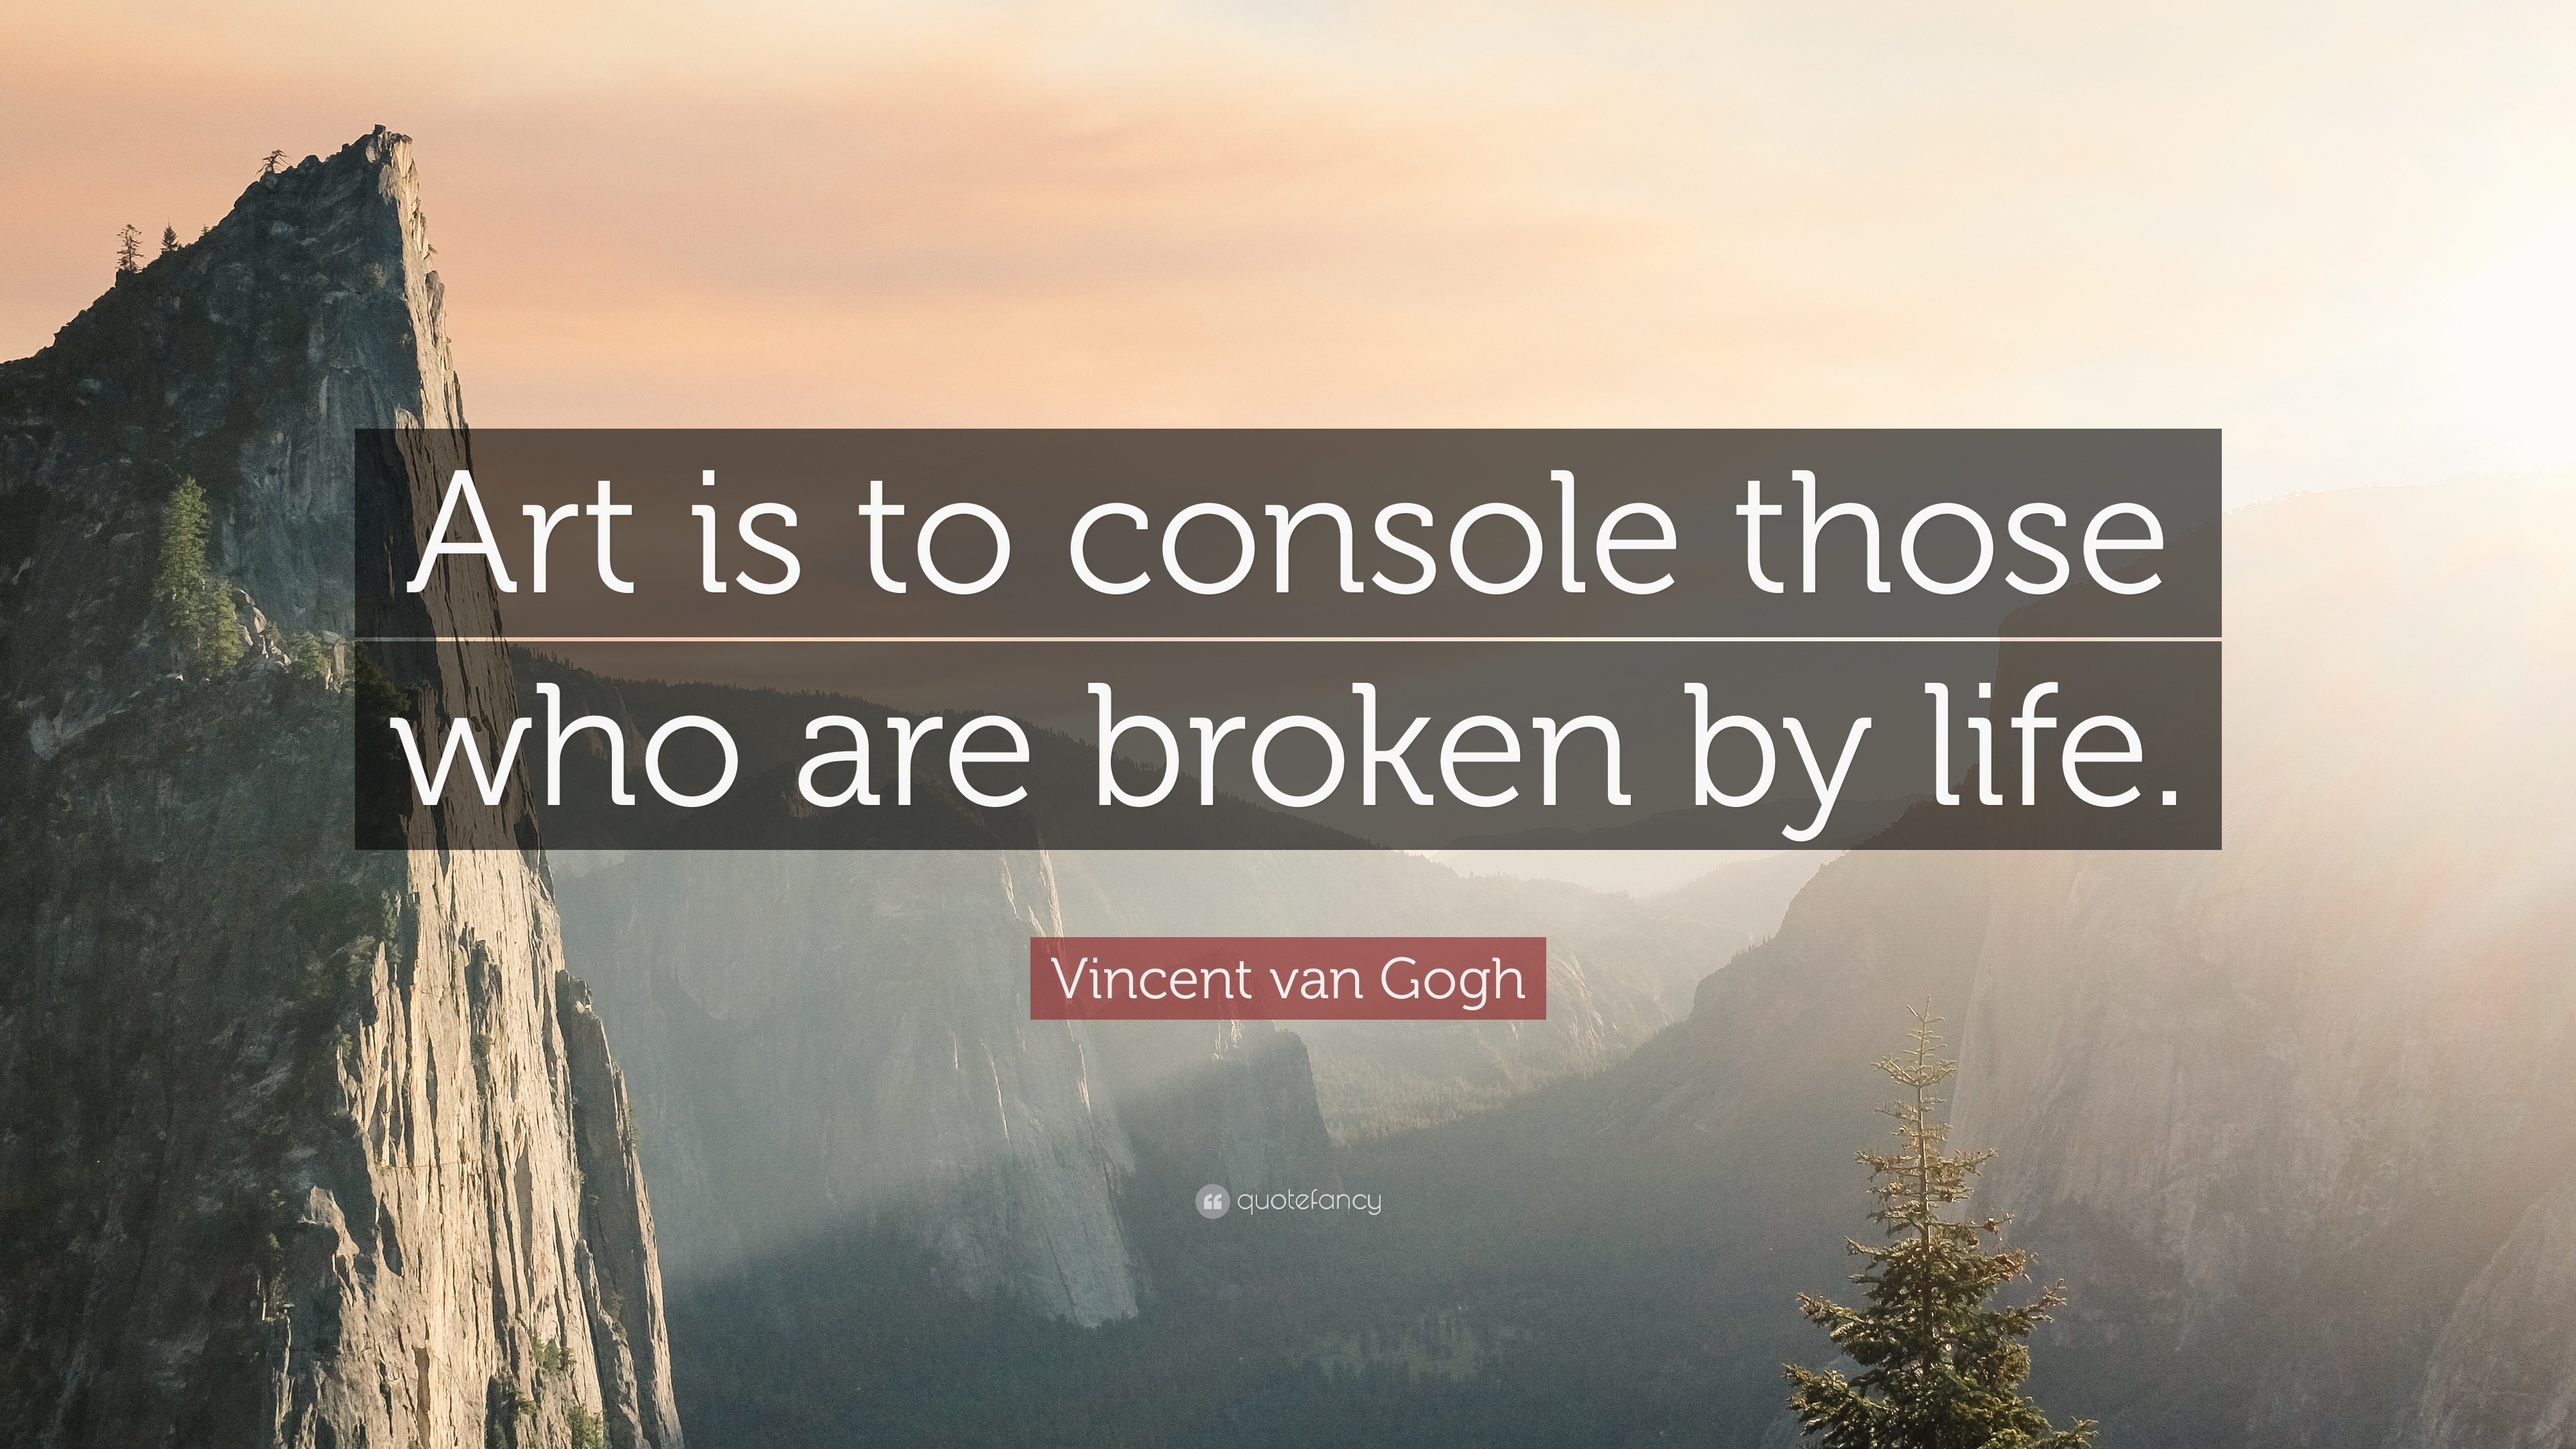 Vincent van Gogh Quote “Art is to console those who are